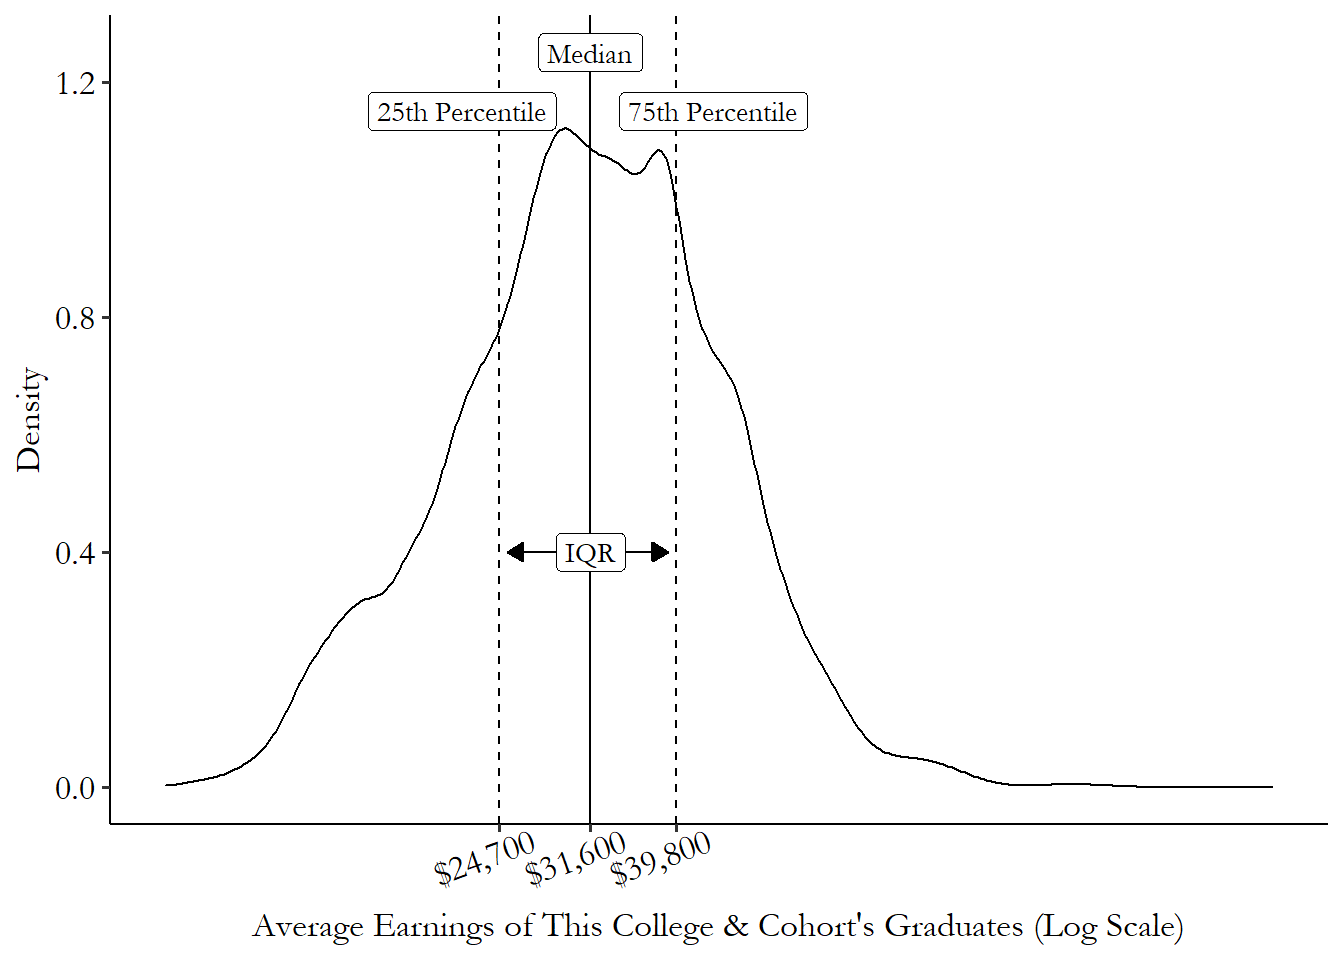 Density plot of the average earnings of a college cohort, with markers at the median, the 25th percentile, and the 75th percentile